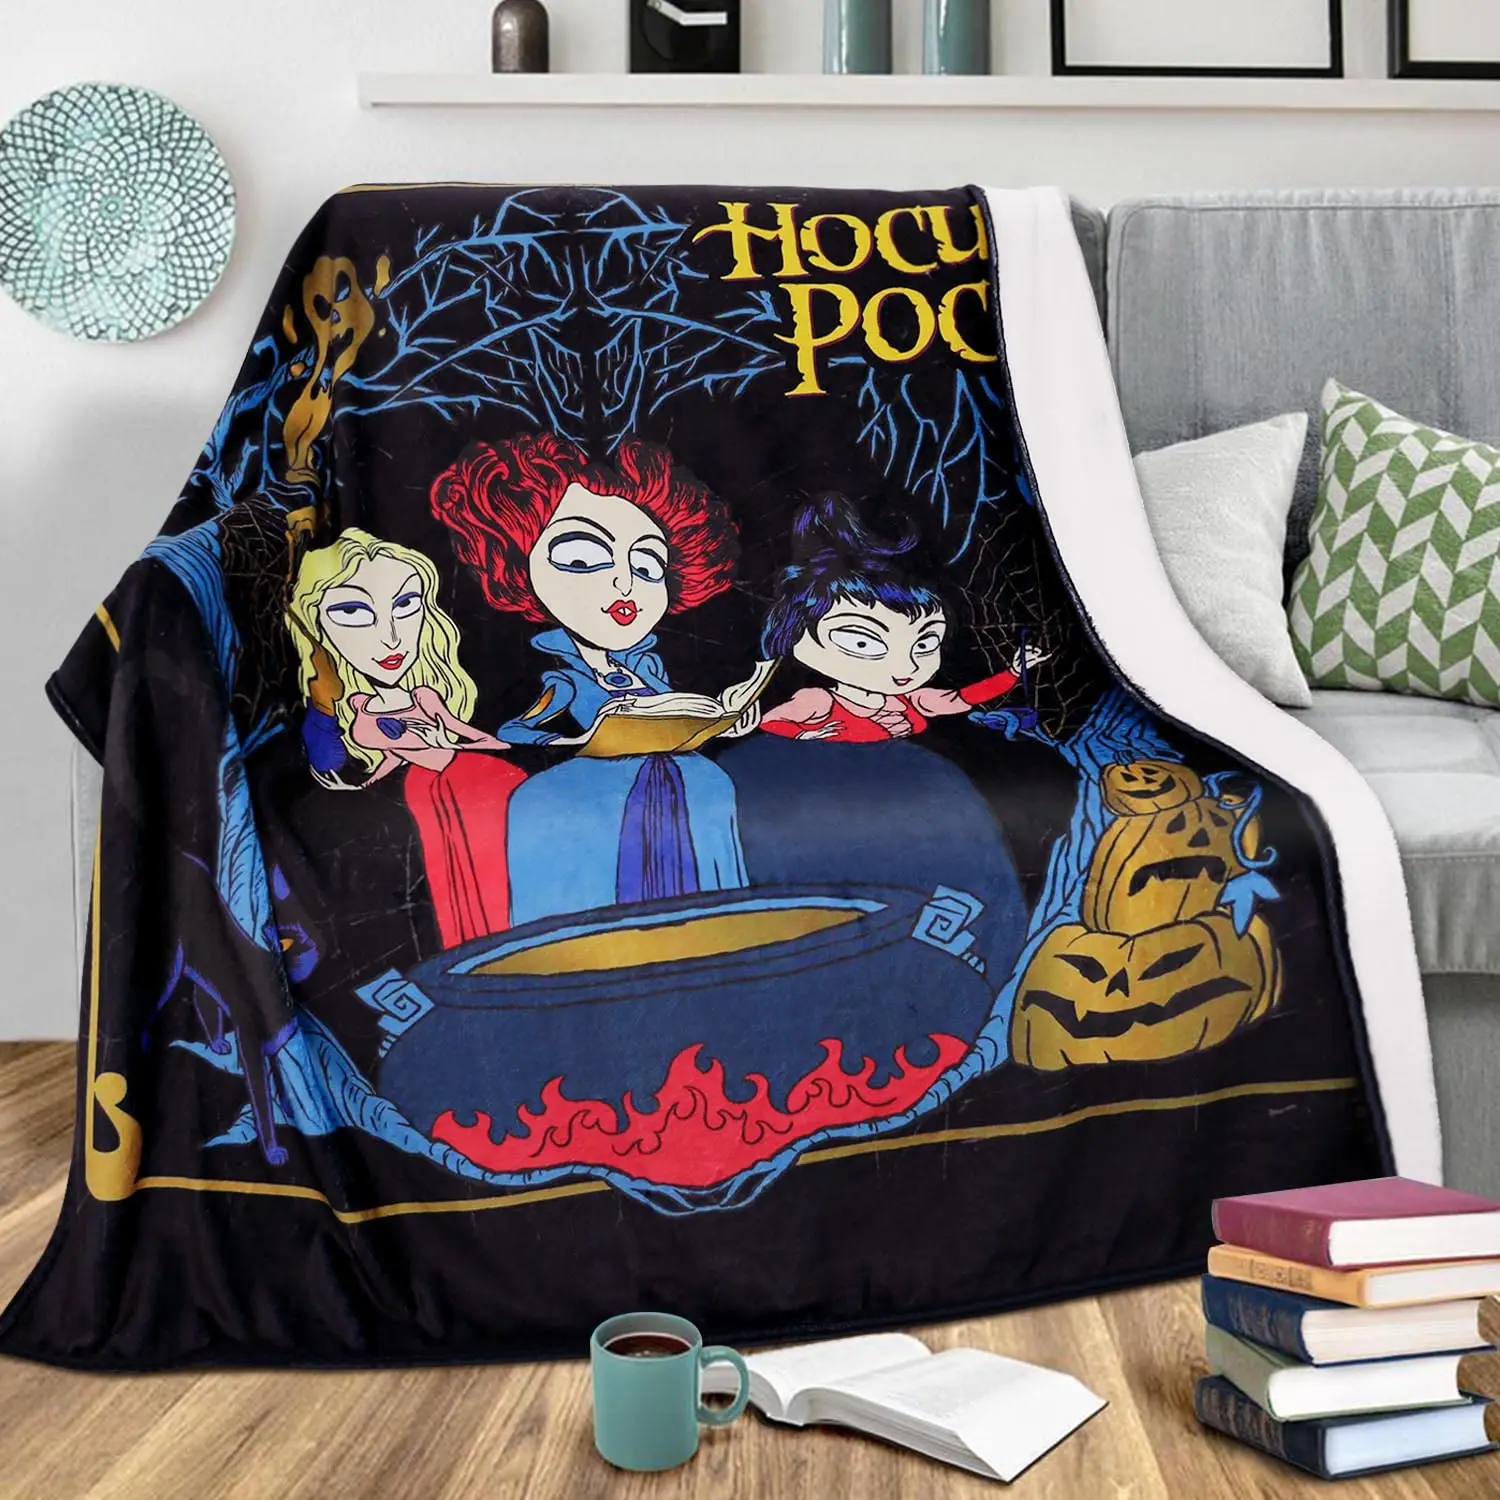 

Haunted House Witches Cat Pumpkins Soft Blanket,Halloween Throw Blankets for Home Sofa Couch Living Bedroom Scary Movie Nights